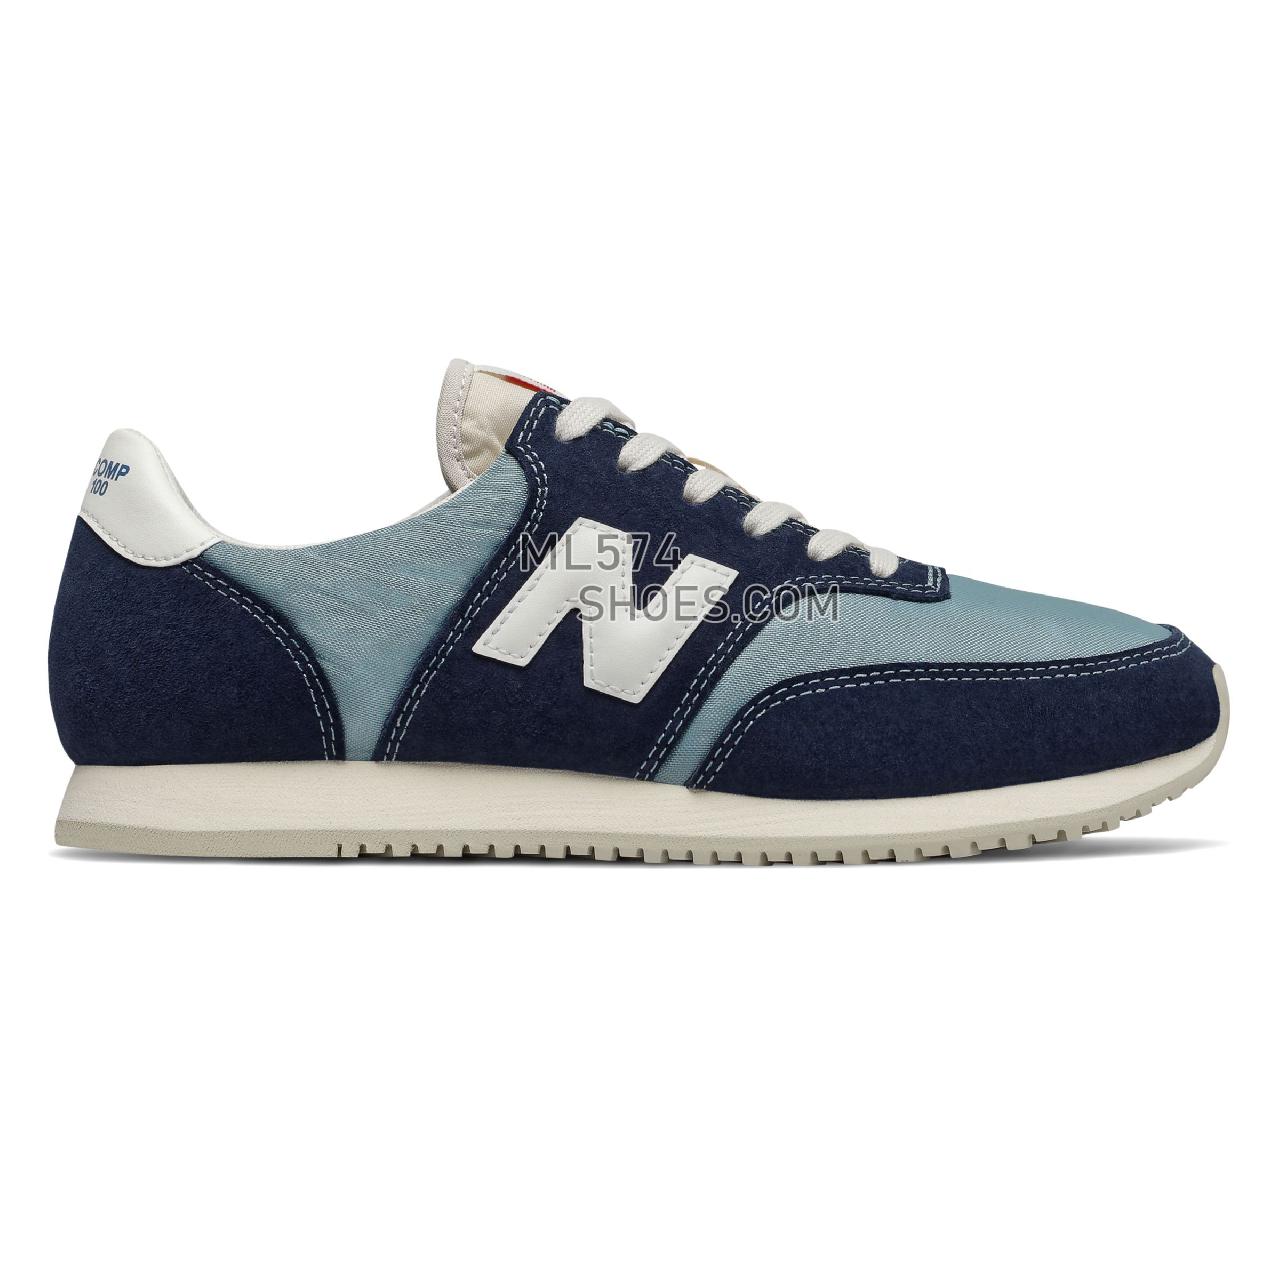 New Balance COMP 100 - Women's Whats Trending - Natural Indigo with Classic Blue - WLC100AA